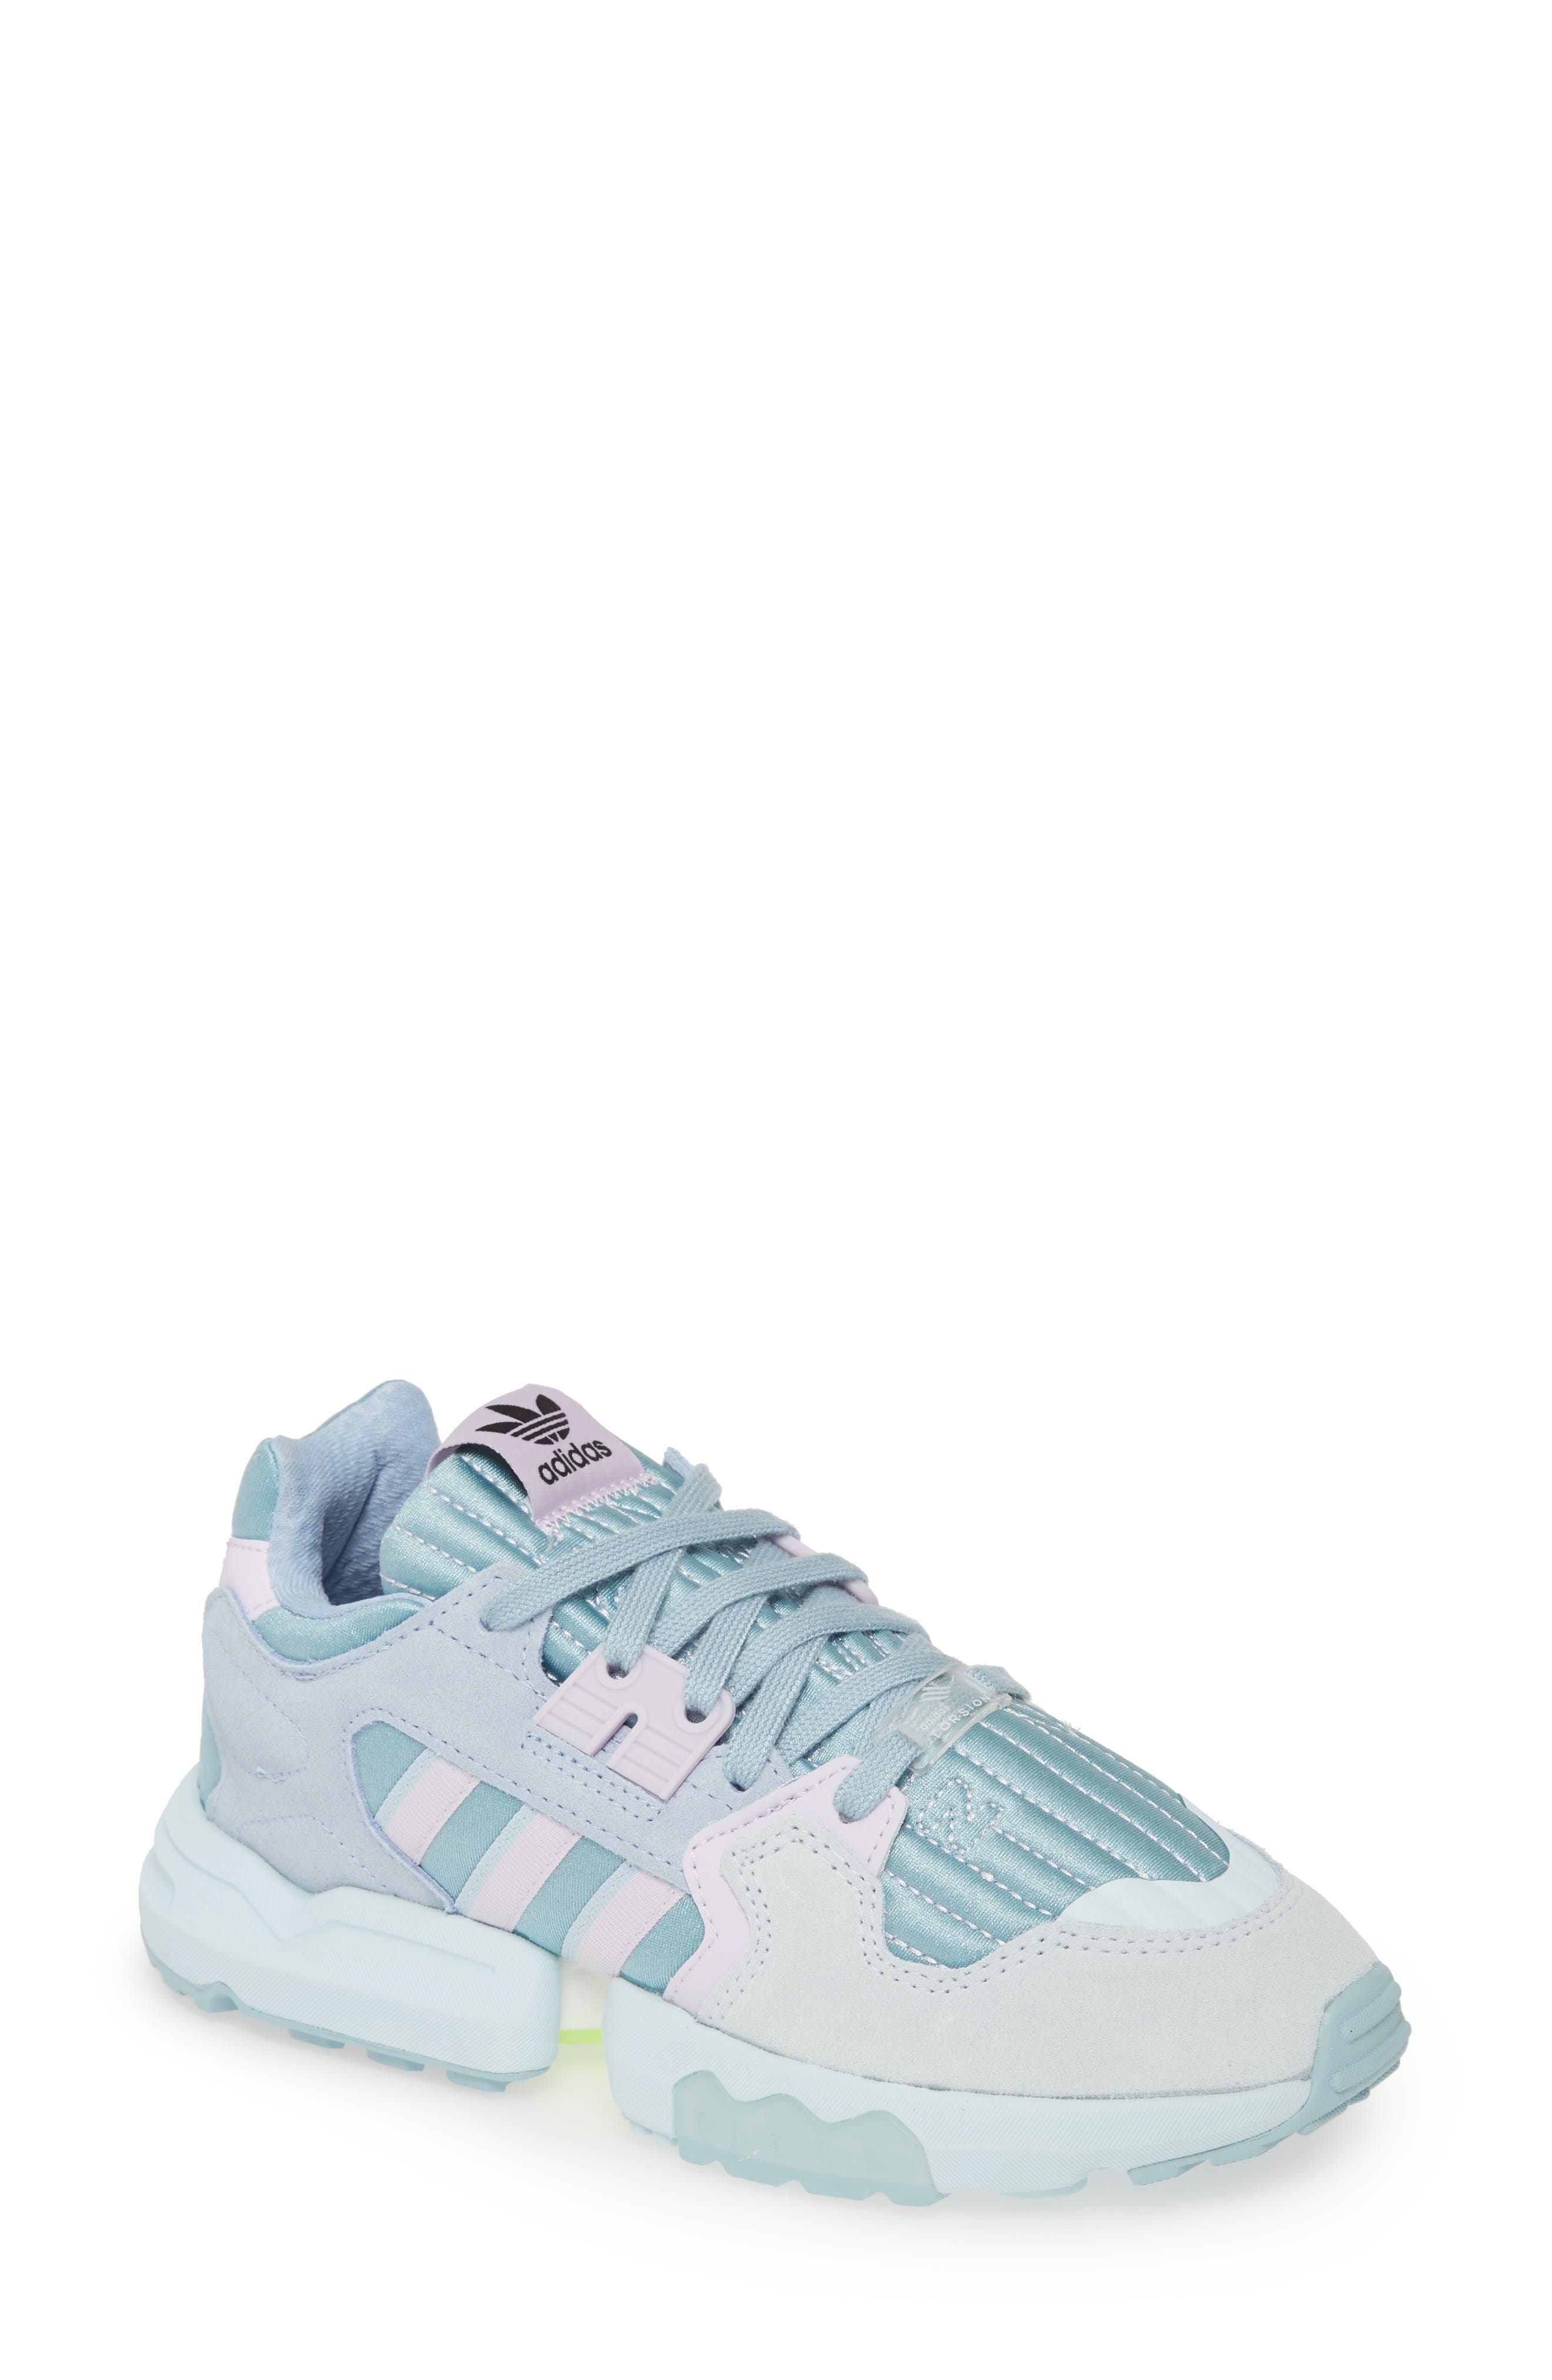 adidas zx torsion sneakers